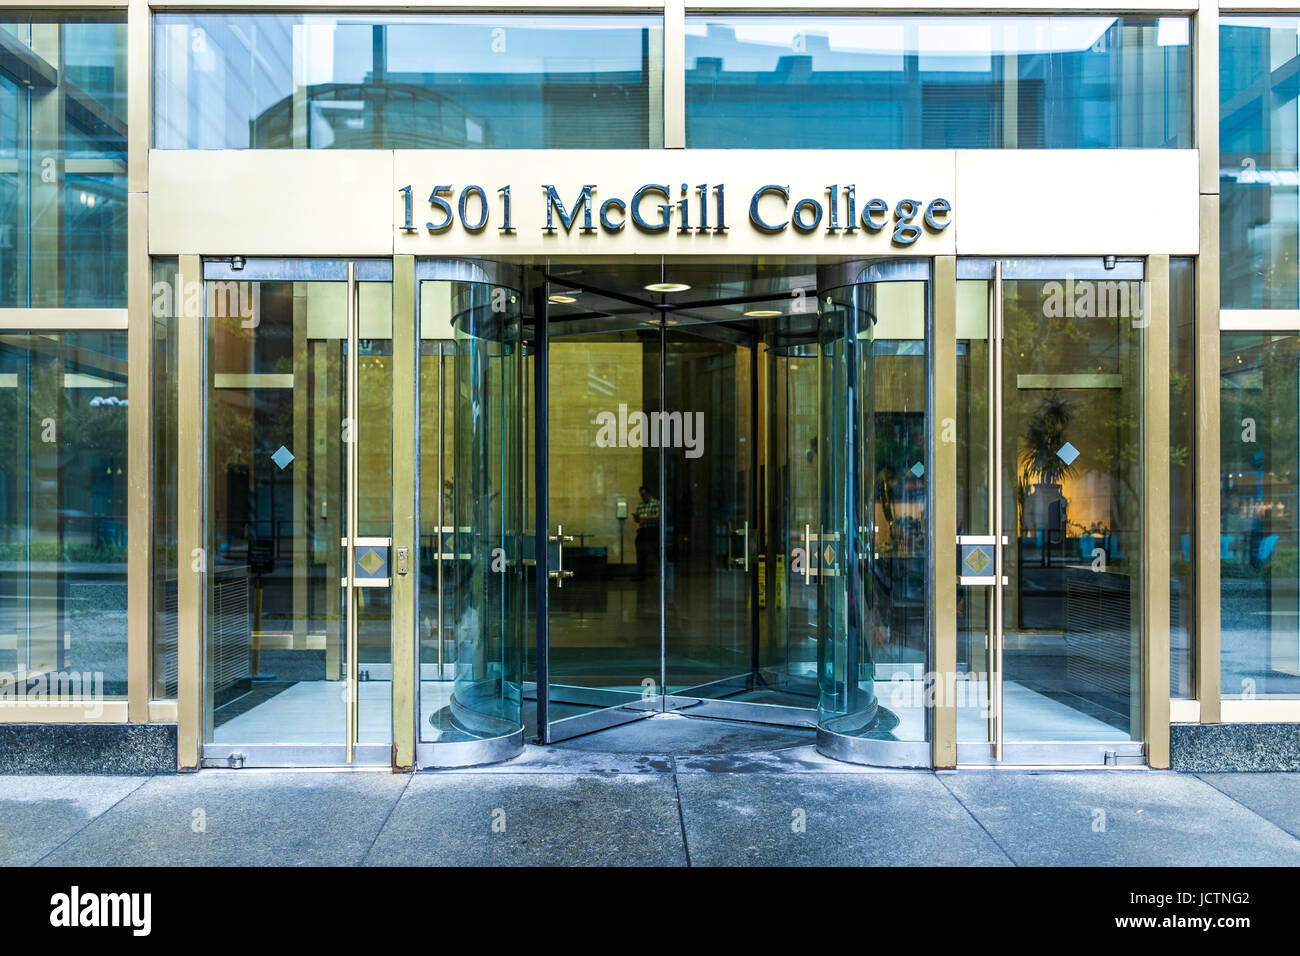 Montreal, Canada - May 26, 2017: McGill College University entrance with modern glass and gold door and sign in city in Quebec region Stock Photo